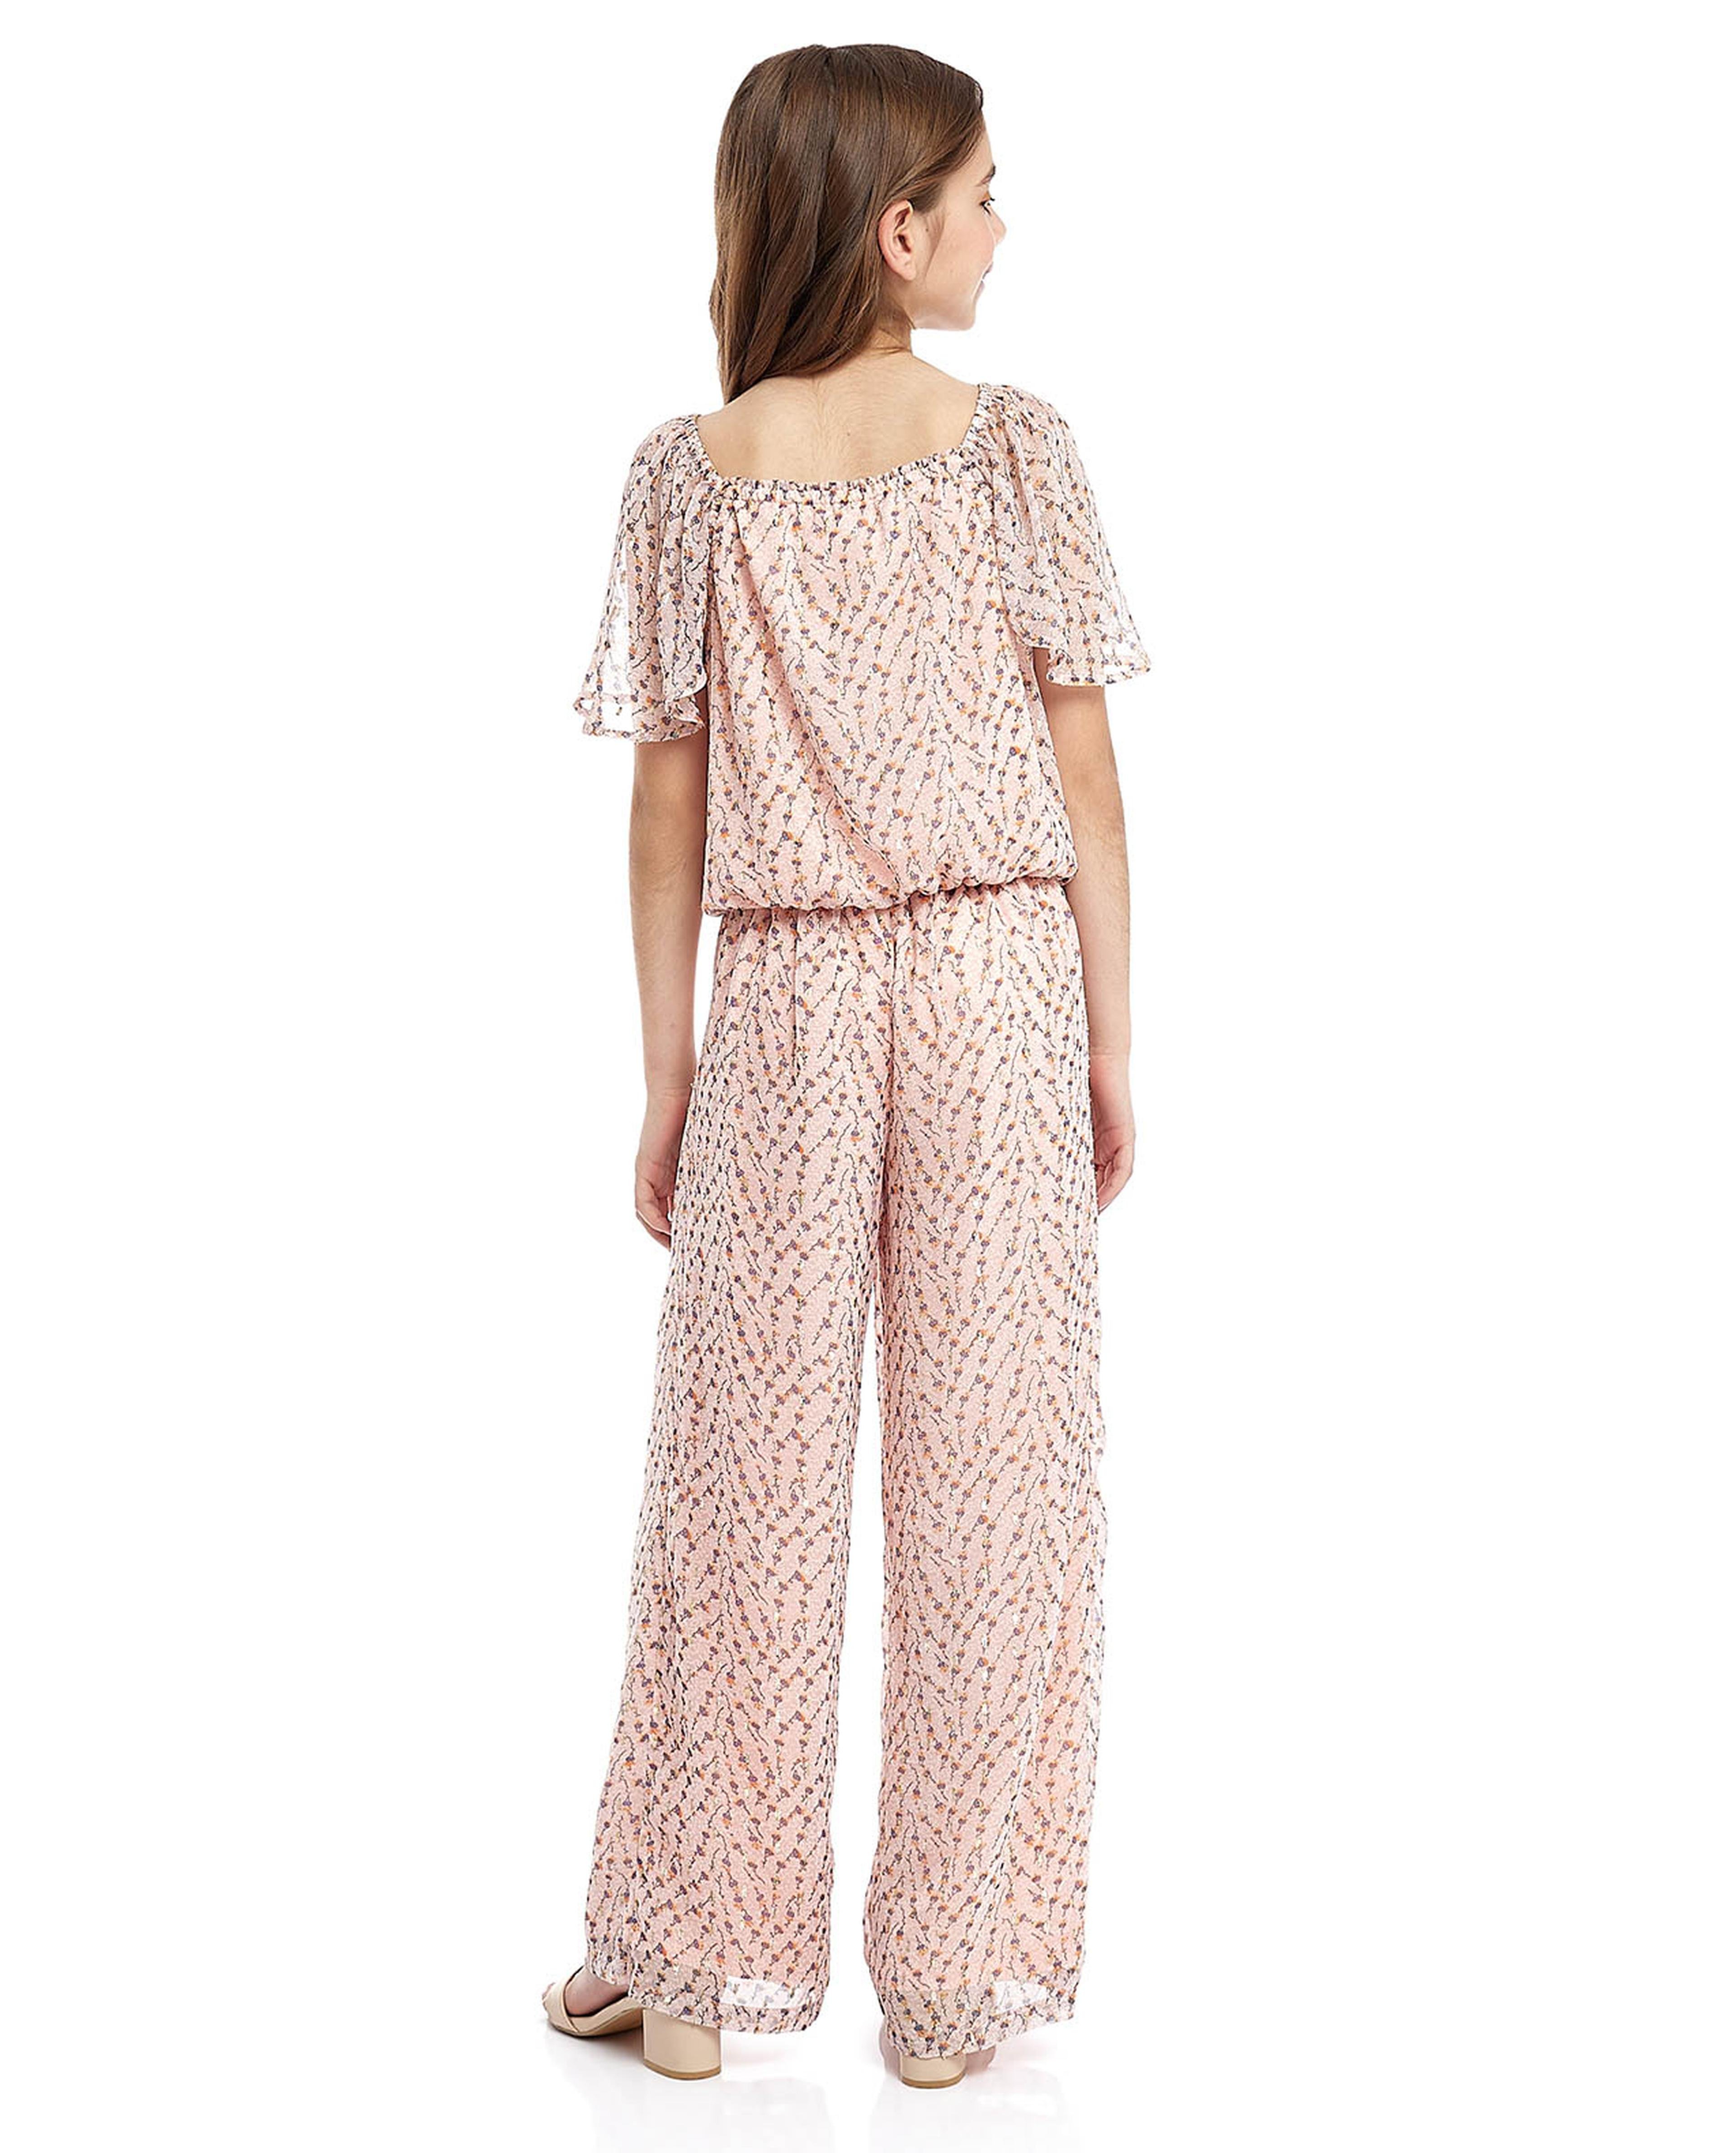 Printed Top and Trouser Set